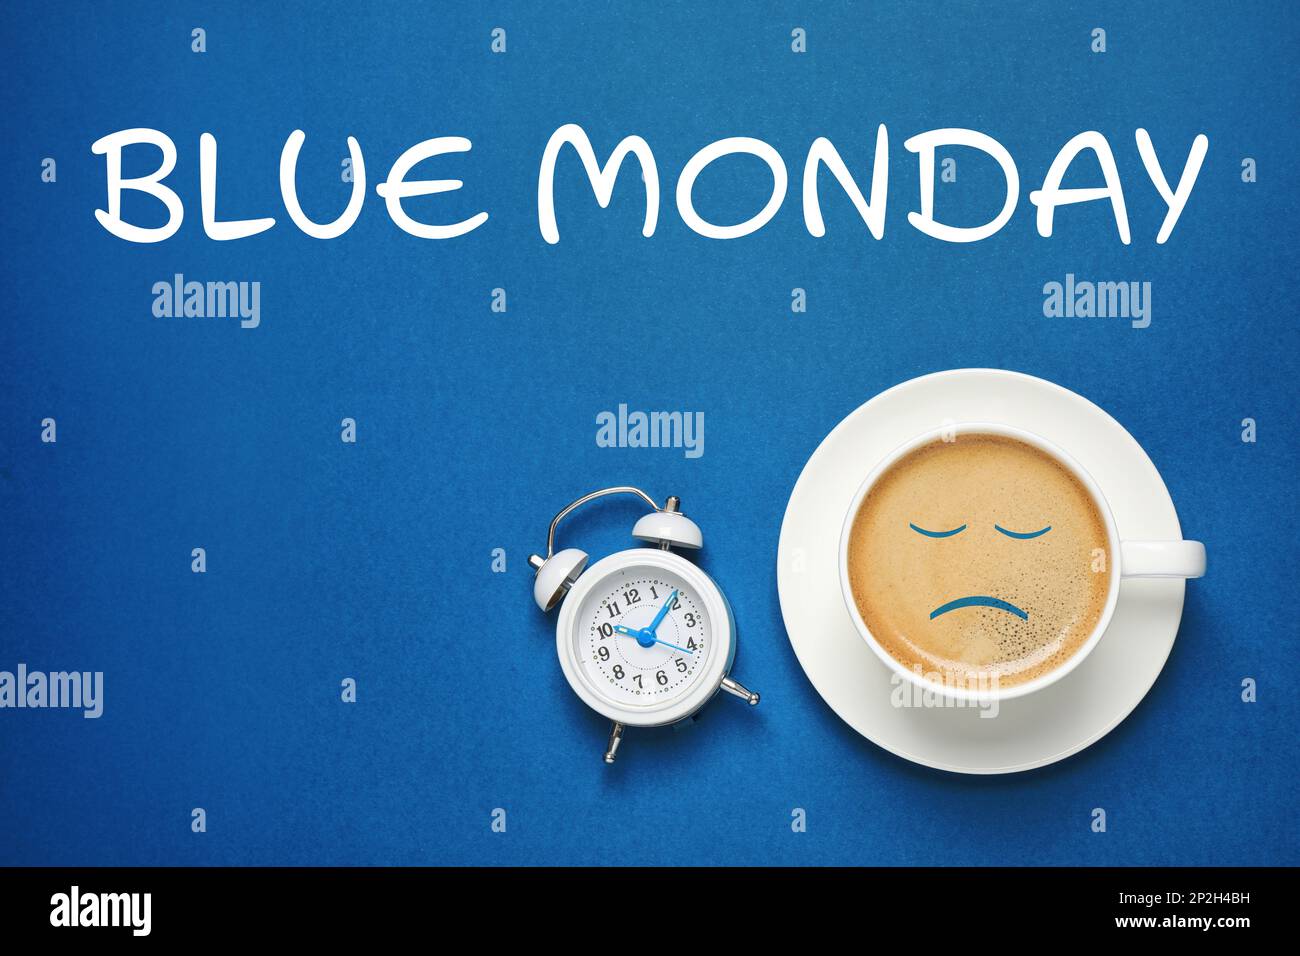 https://c8.alamy.com/comp/2P2H4BH/cup-of-coffee-alarm-clock-and-text-blue-monday-on-color-background-flat-lay-2P2H4BH.jpg